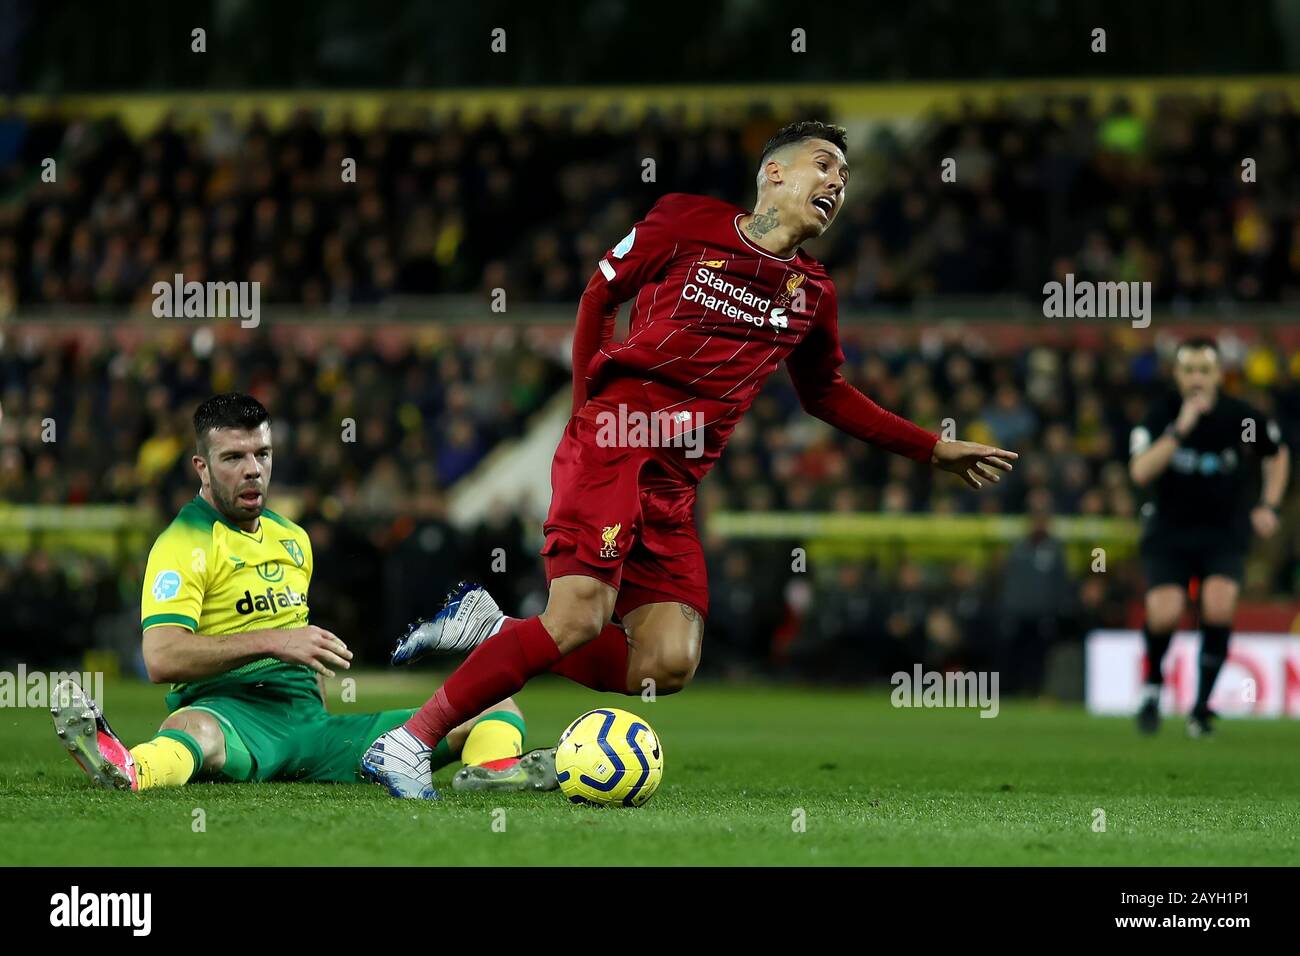 15th February 2020; Carrow Road, Norwich, Norfolk, England, English Premier League Football, Norwich versus Liverpool; Grant Hanley of Norwich City fouls Roberto Firmino of Liverpool Stock Photo